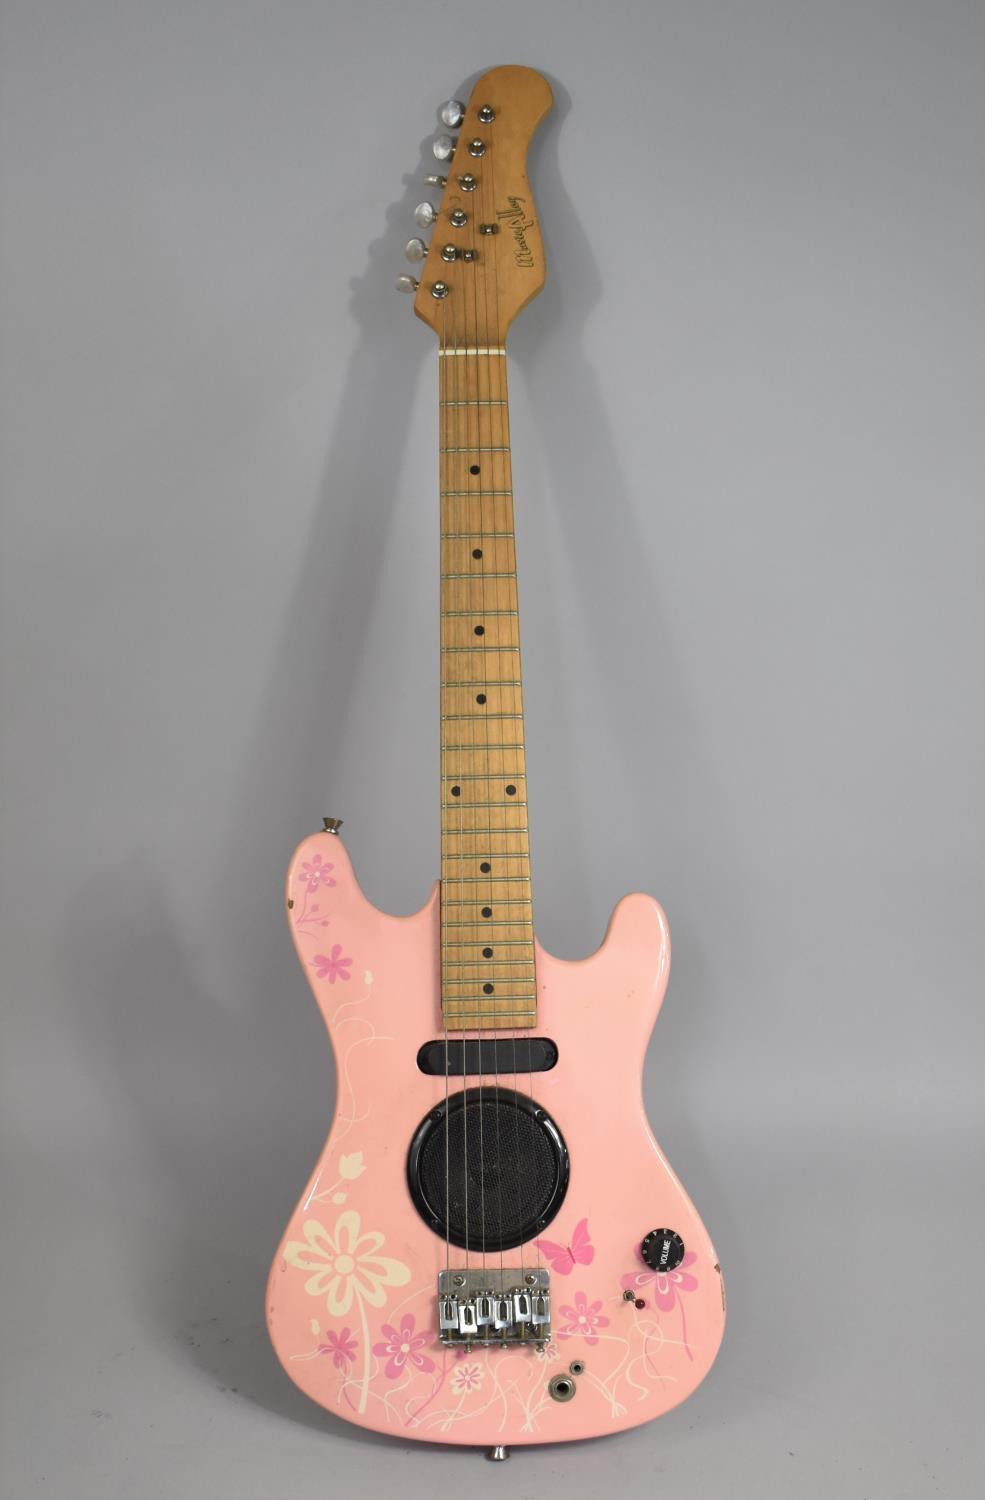 A Child's "Music Alley" Electric Guitar, Untested